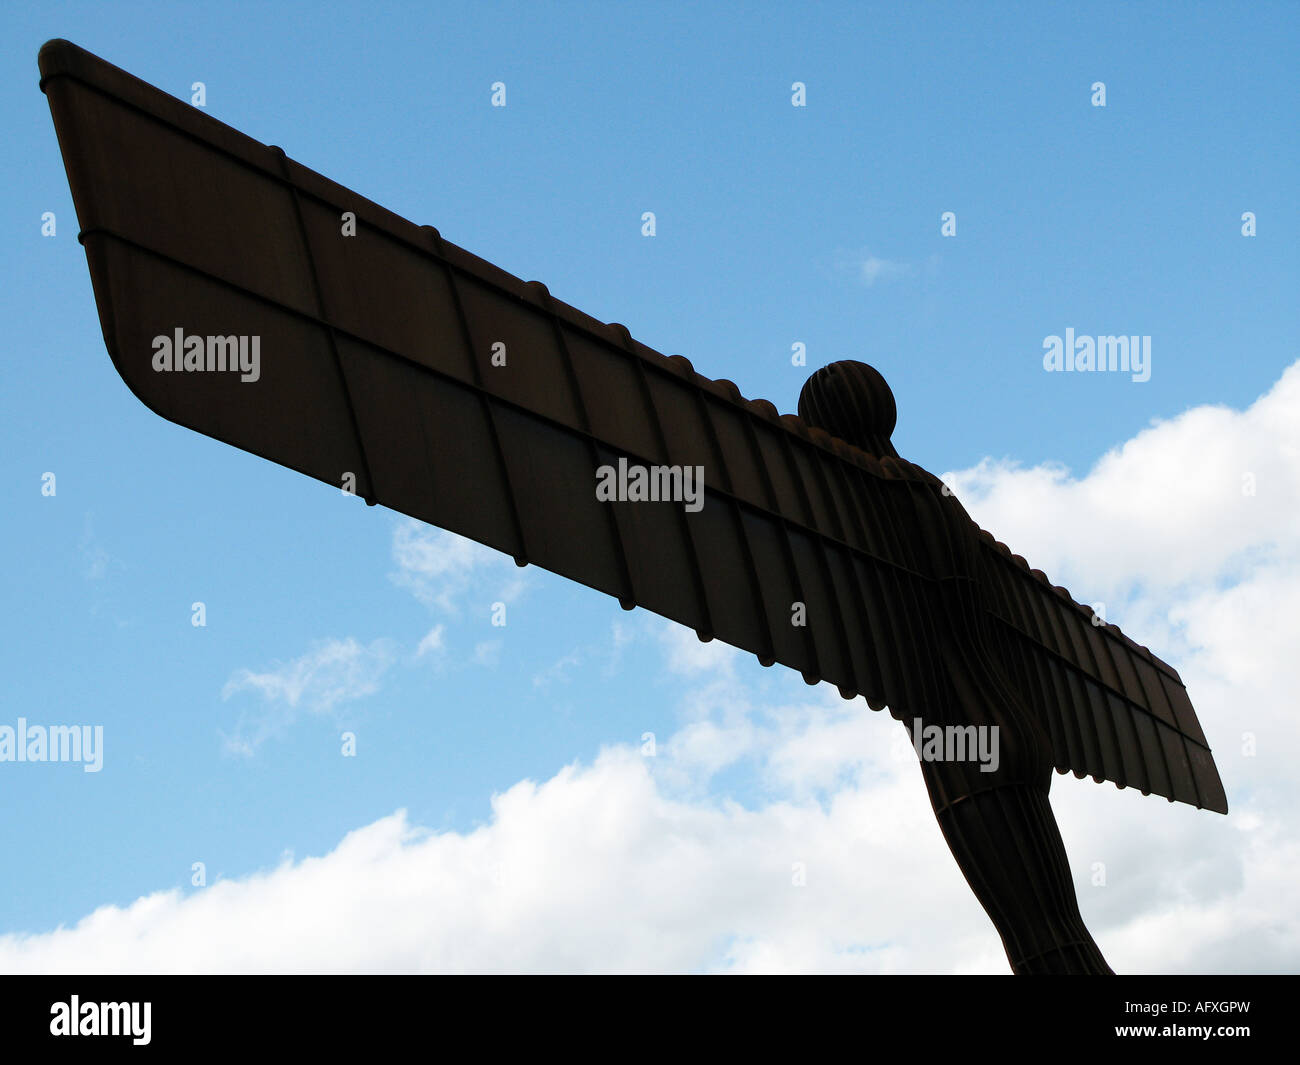 The Angel of the North, Newcastle England against blue skies. Stock Photo